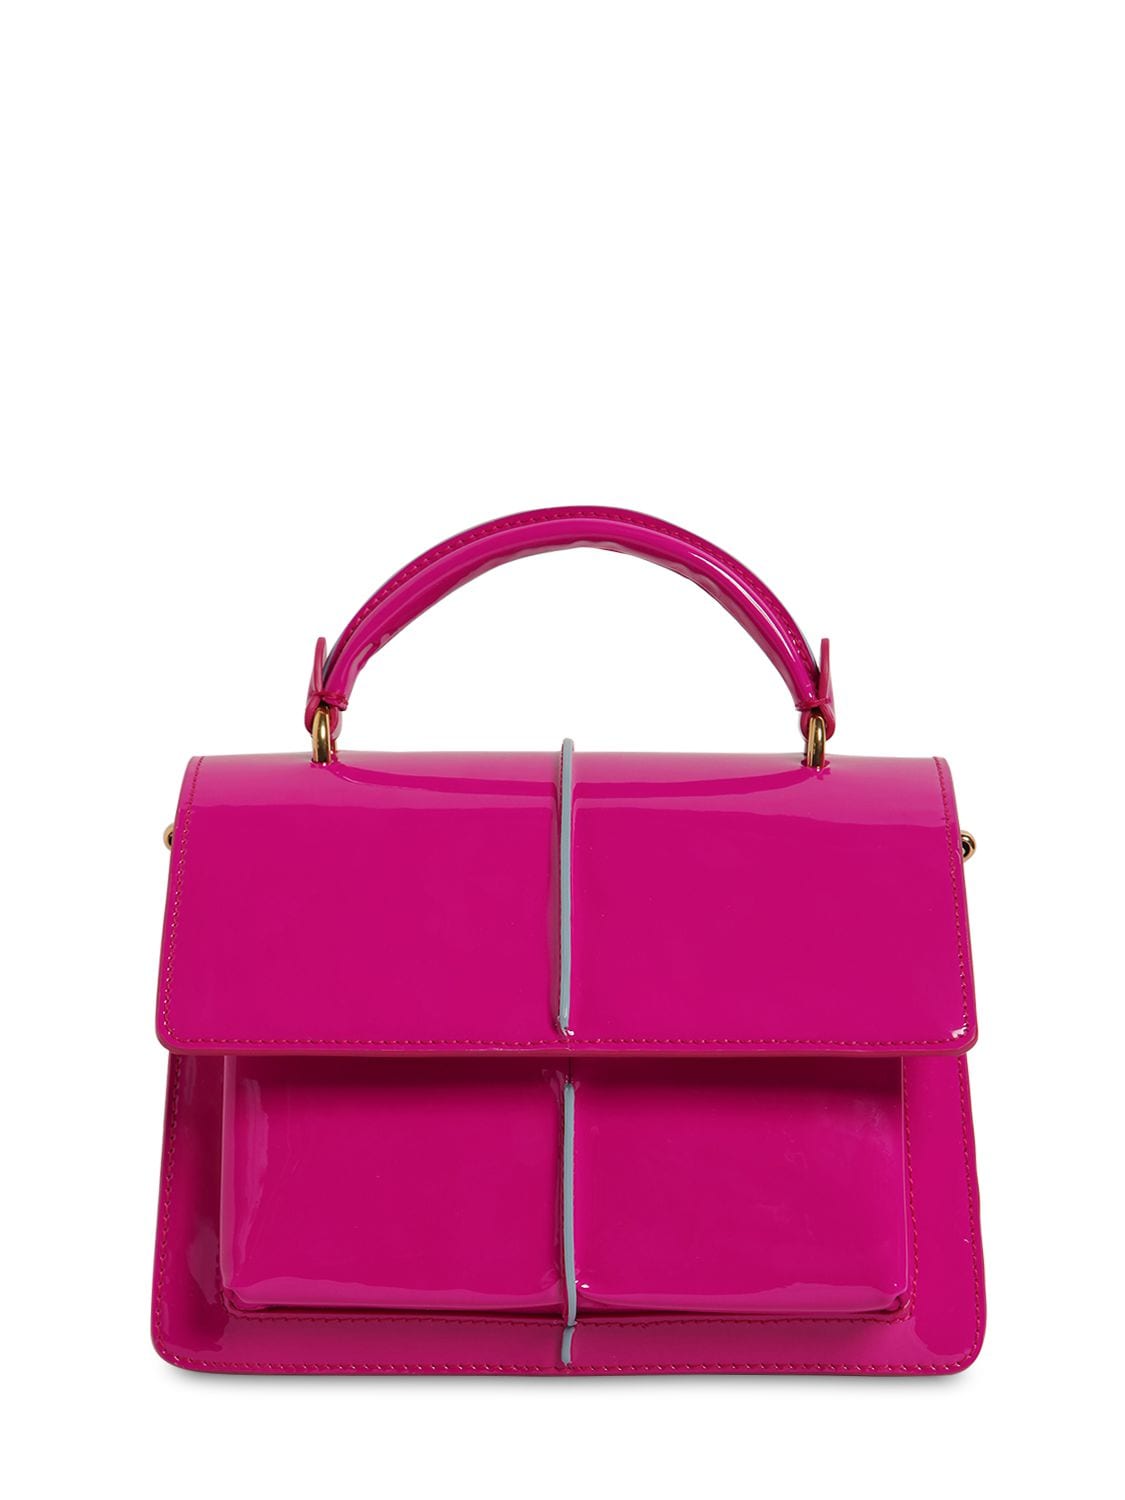 Marni Small Attaché Patent Leather Bag In Orchid